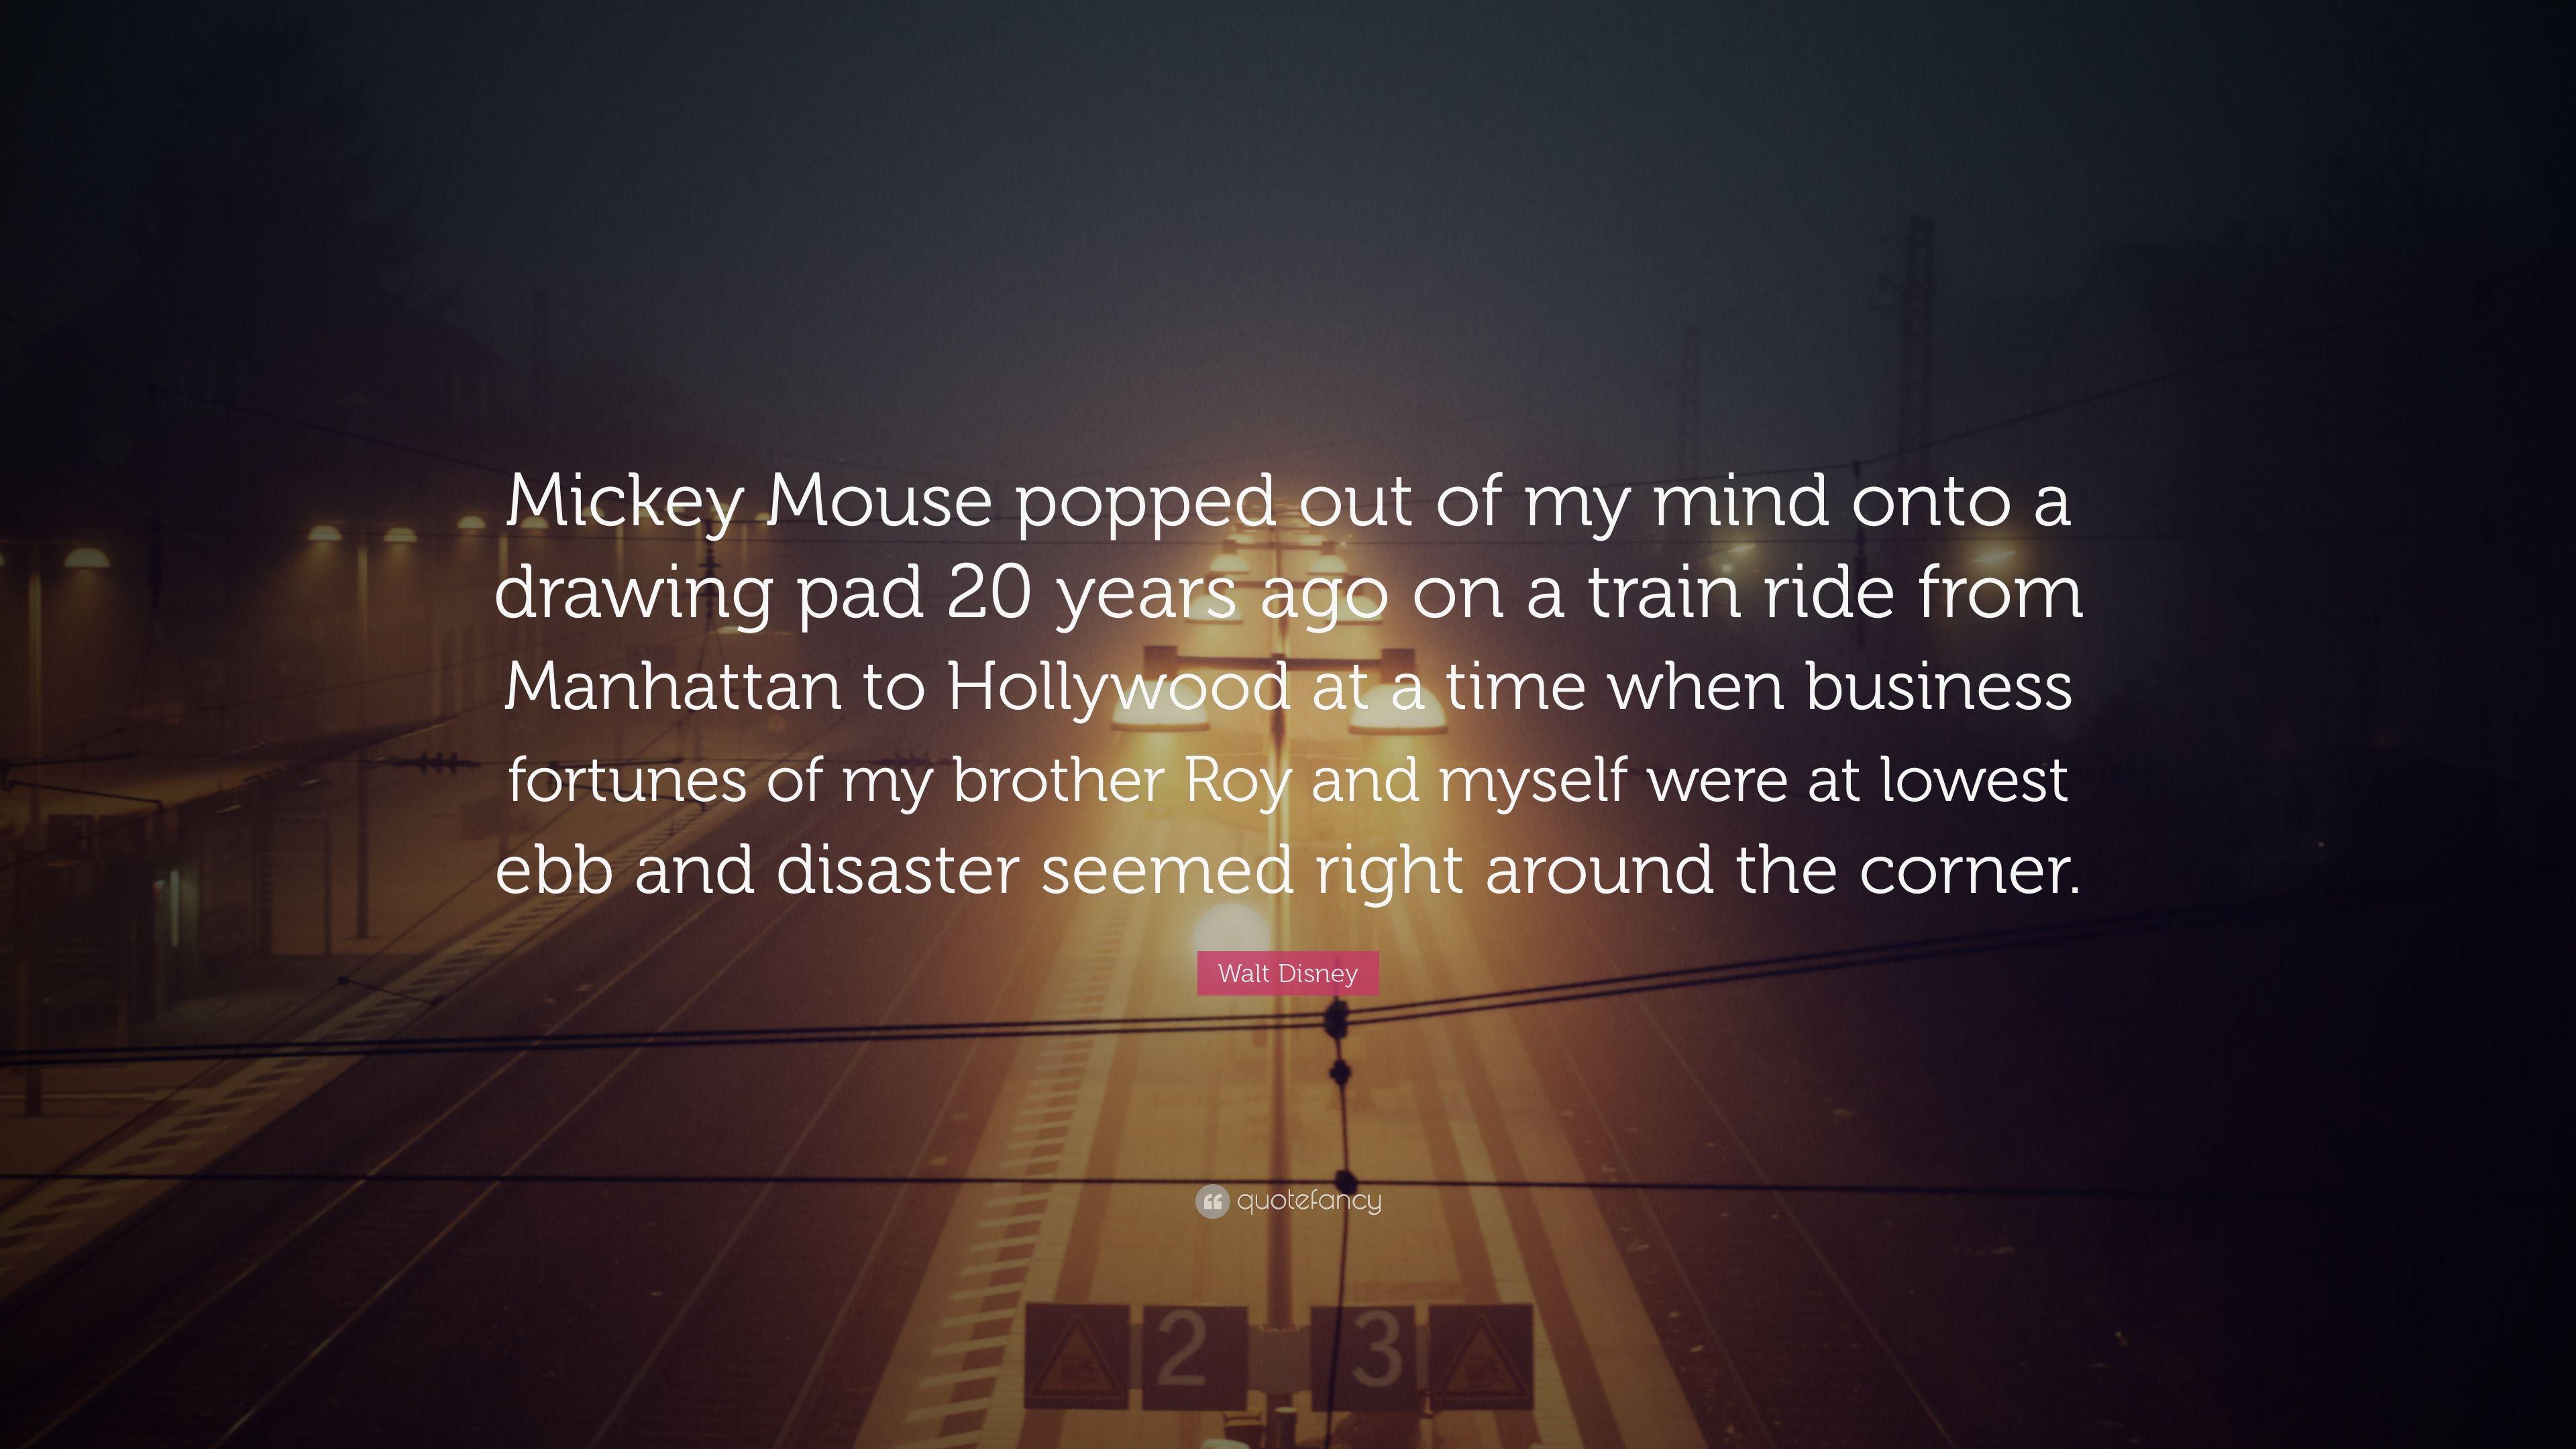 Walt Disney Quote: “Mickey Mouse popped out of my mind onto a